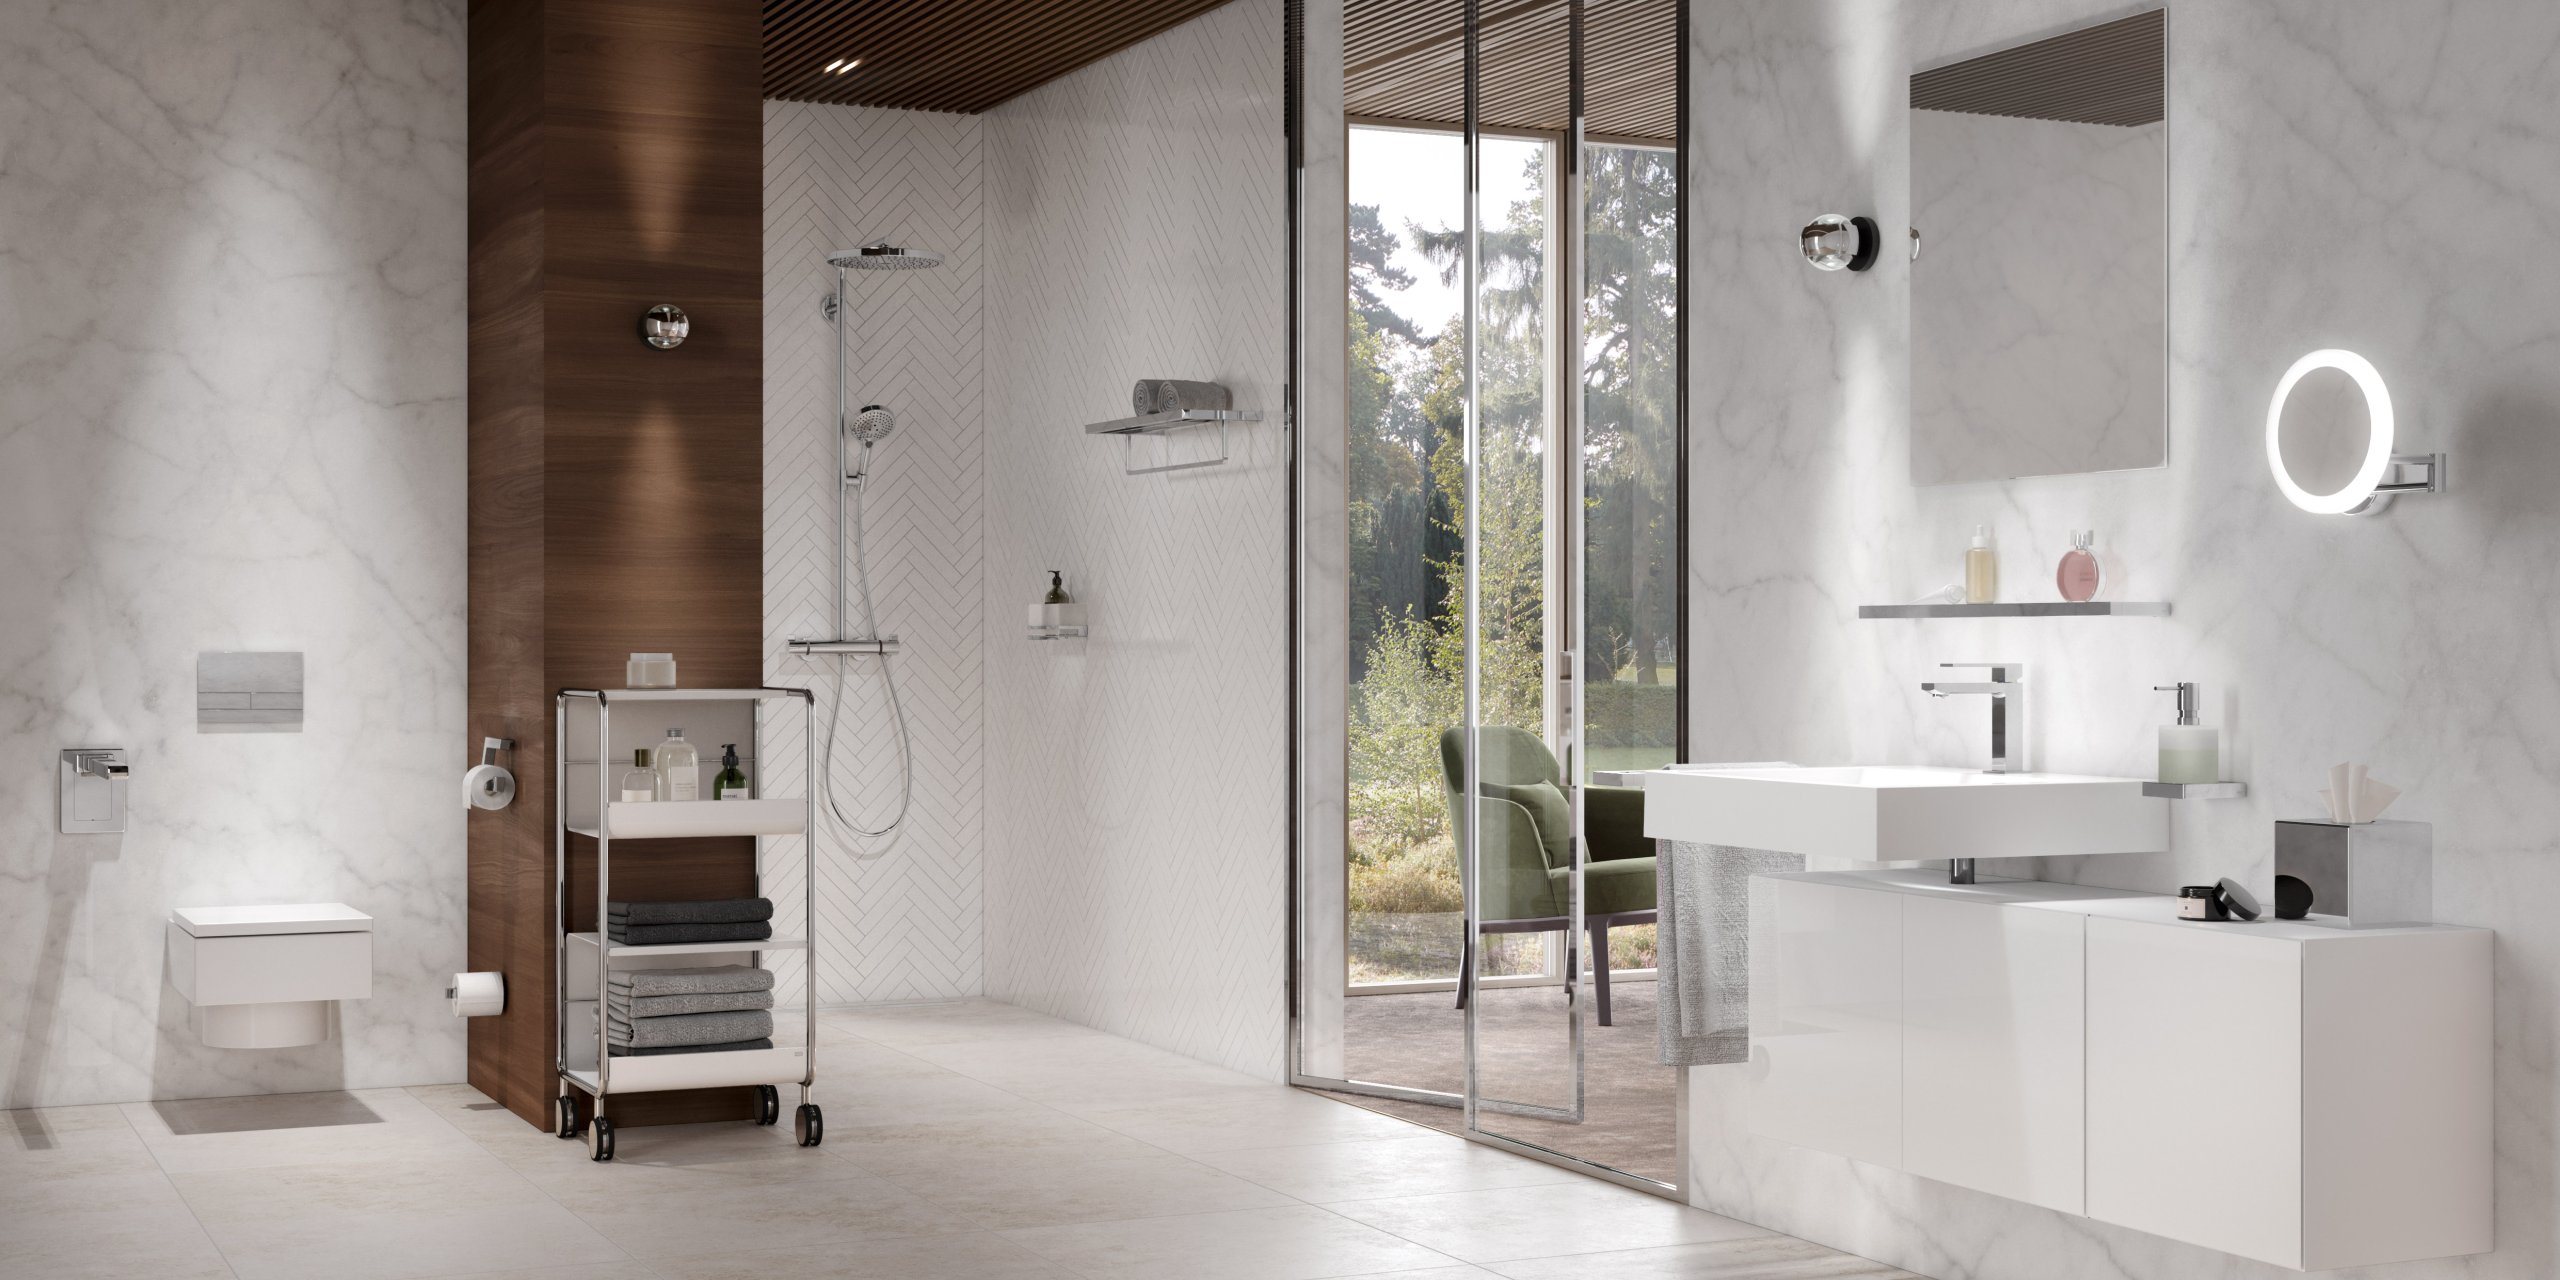 Interior bathroom with glass doors and chrome sanitary fittings